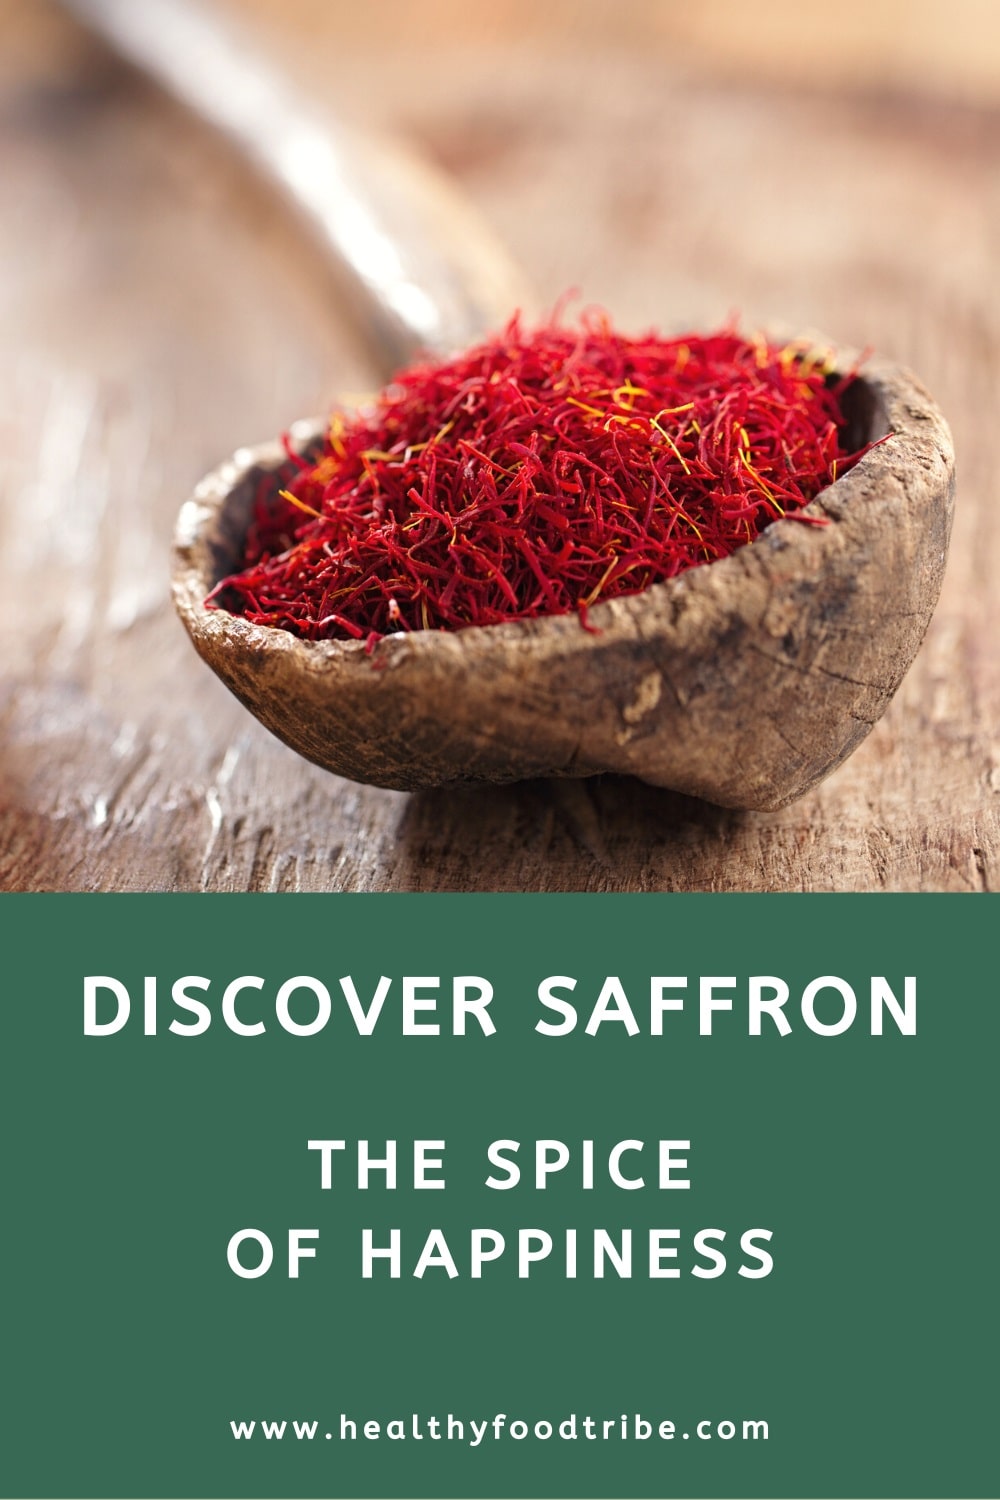 What Is saffron? Discover the spice of happiness